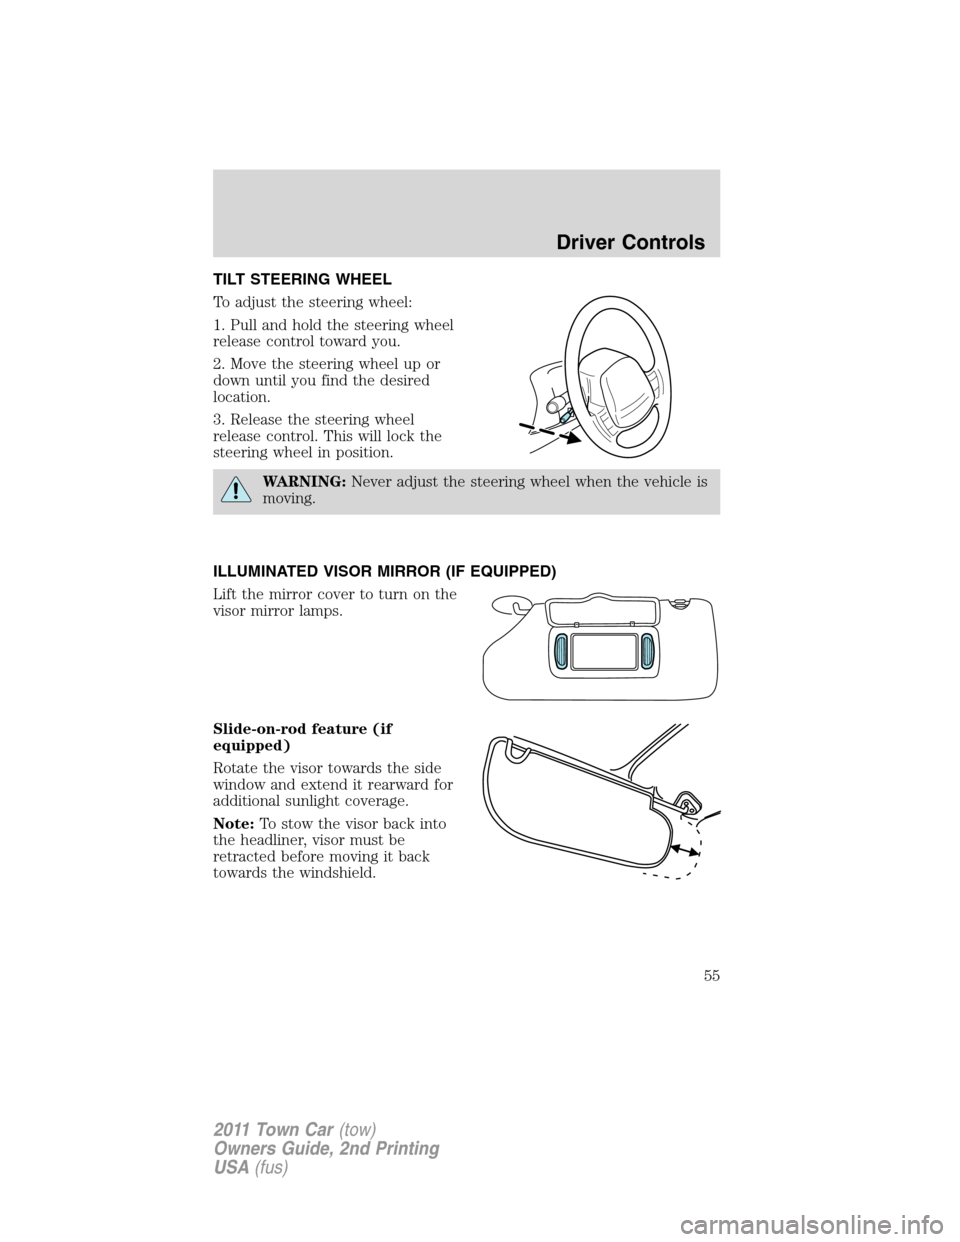 LINCOLN TOWN CAR 2011 Workshop Manual TILT STEERING WHEEL
To adjust the steering wheel:
1. Pull and hold the steering wheel
release control toward you.
2. Move the steering wheel up or
down until you find the desired
location.
3. Release 